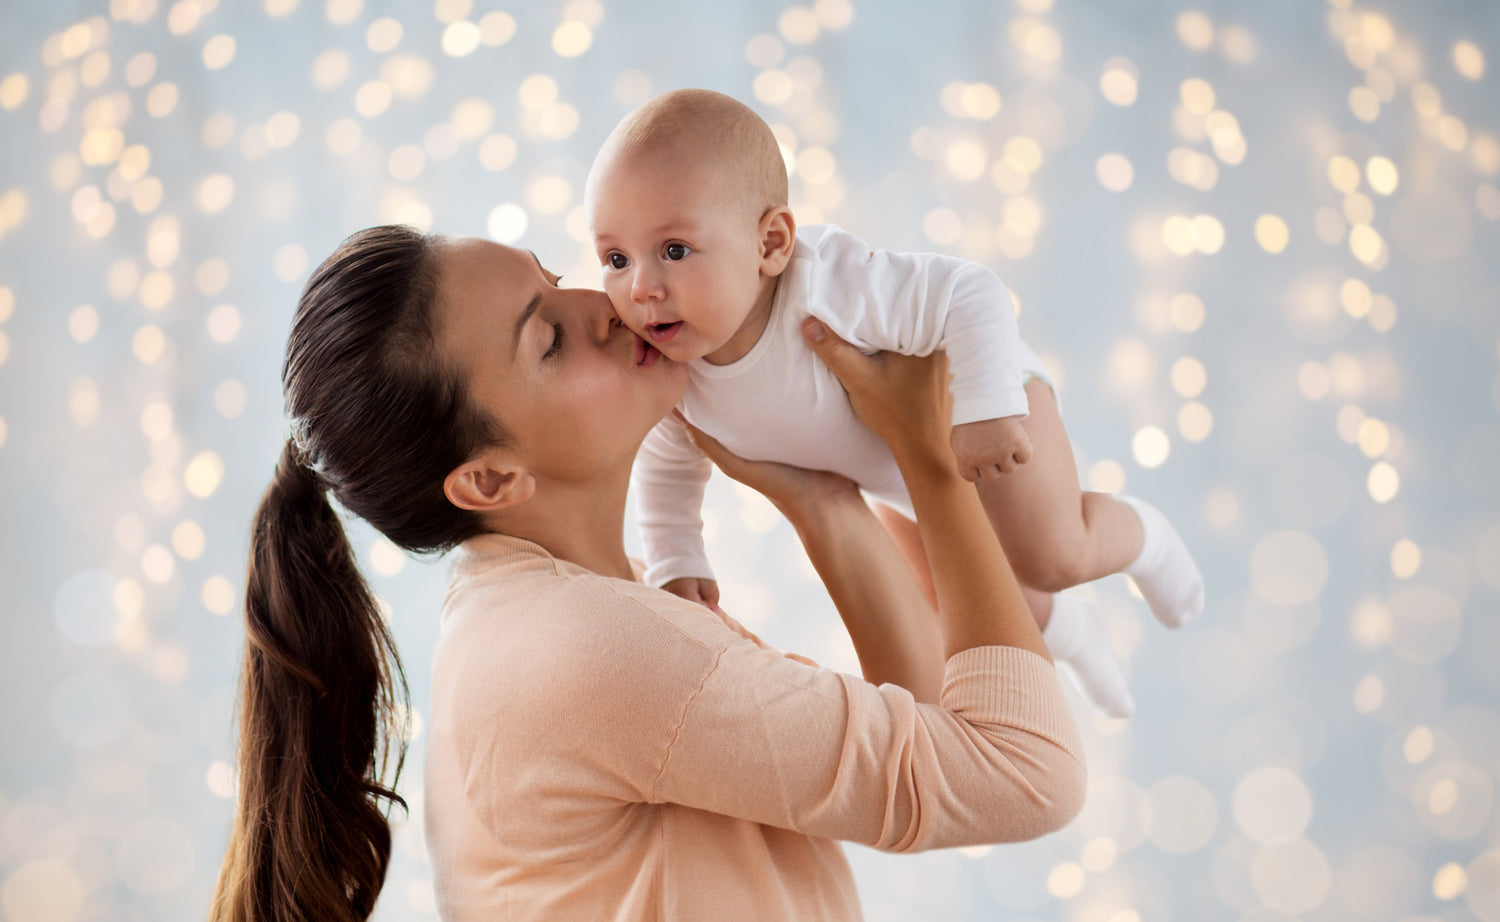 Baby Care Tips That All Mothers Should Know